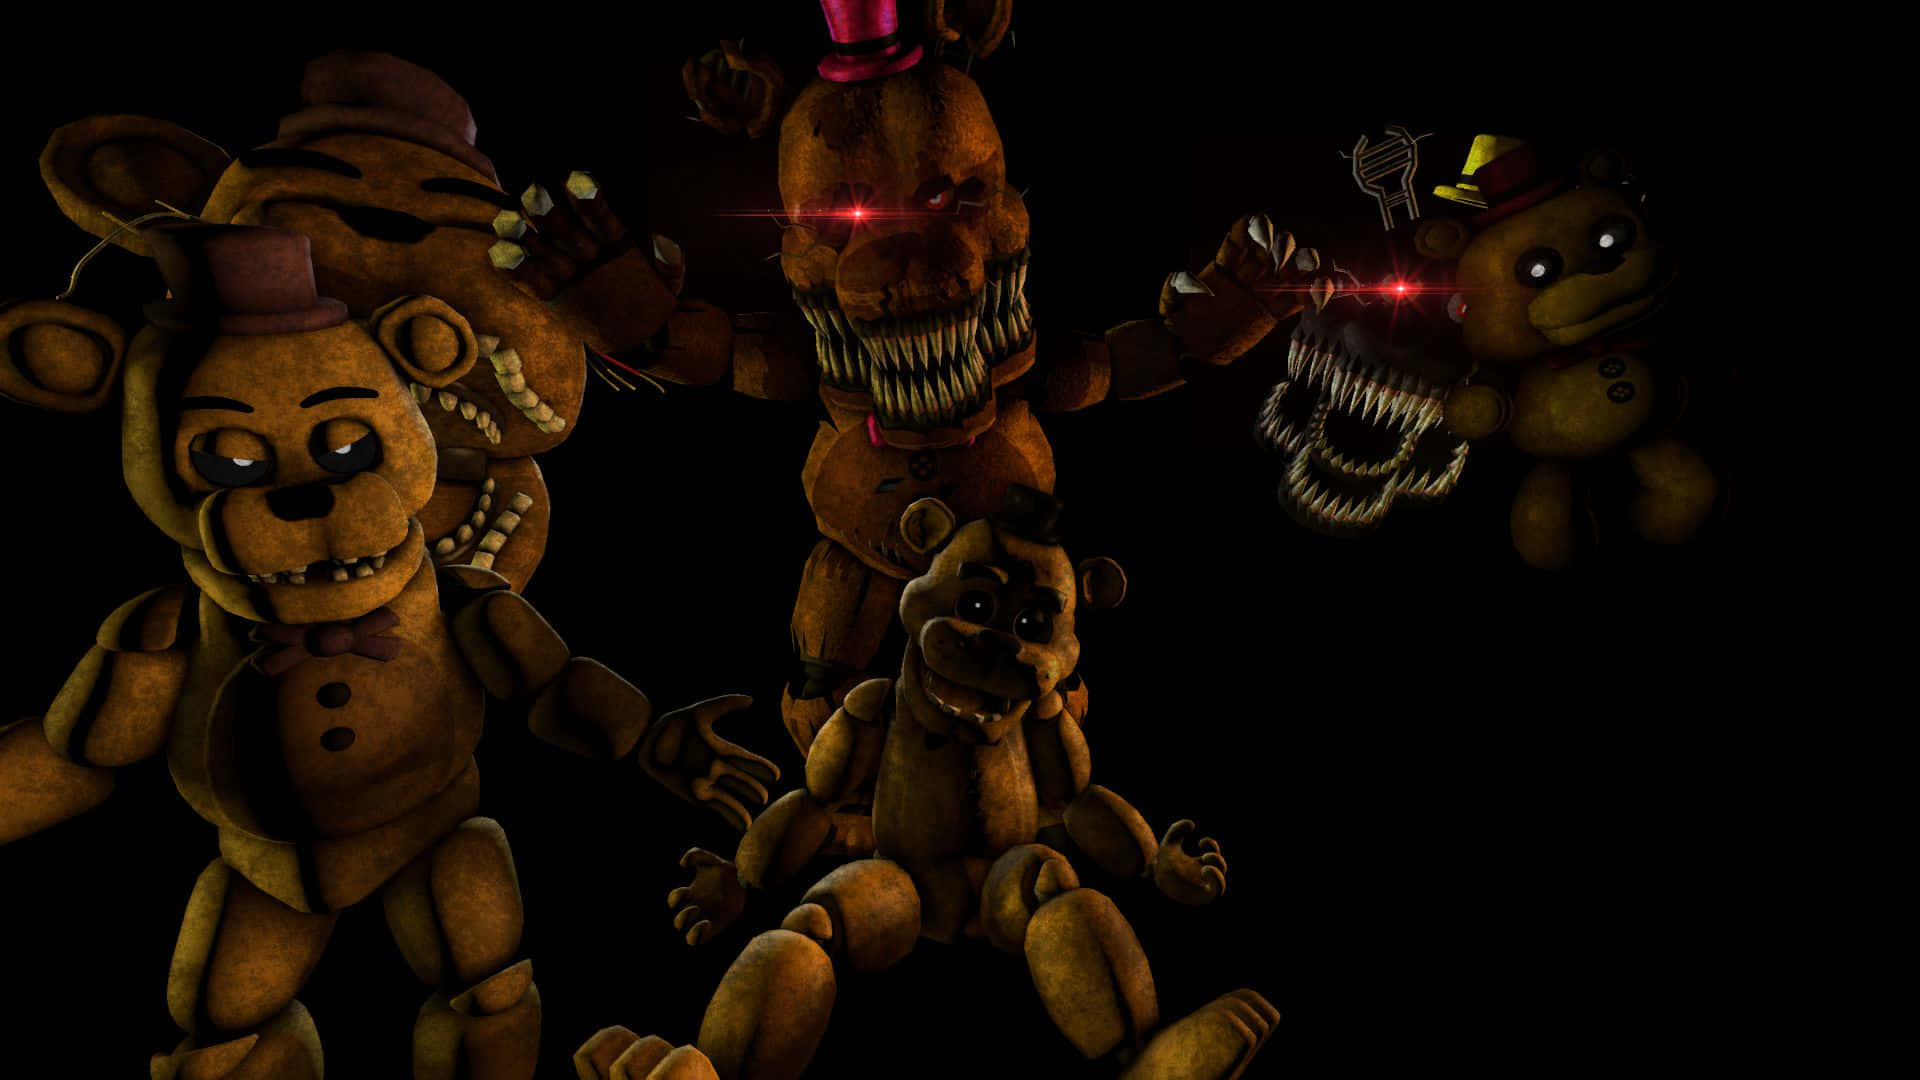 Spine-chilling Image of Five Nights at Freddy's (FNaF) Characters